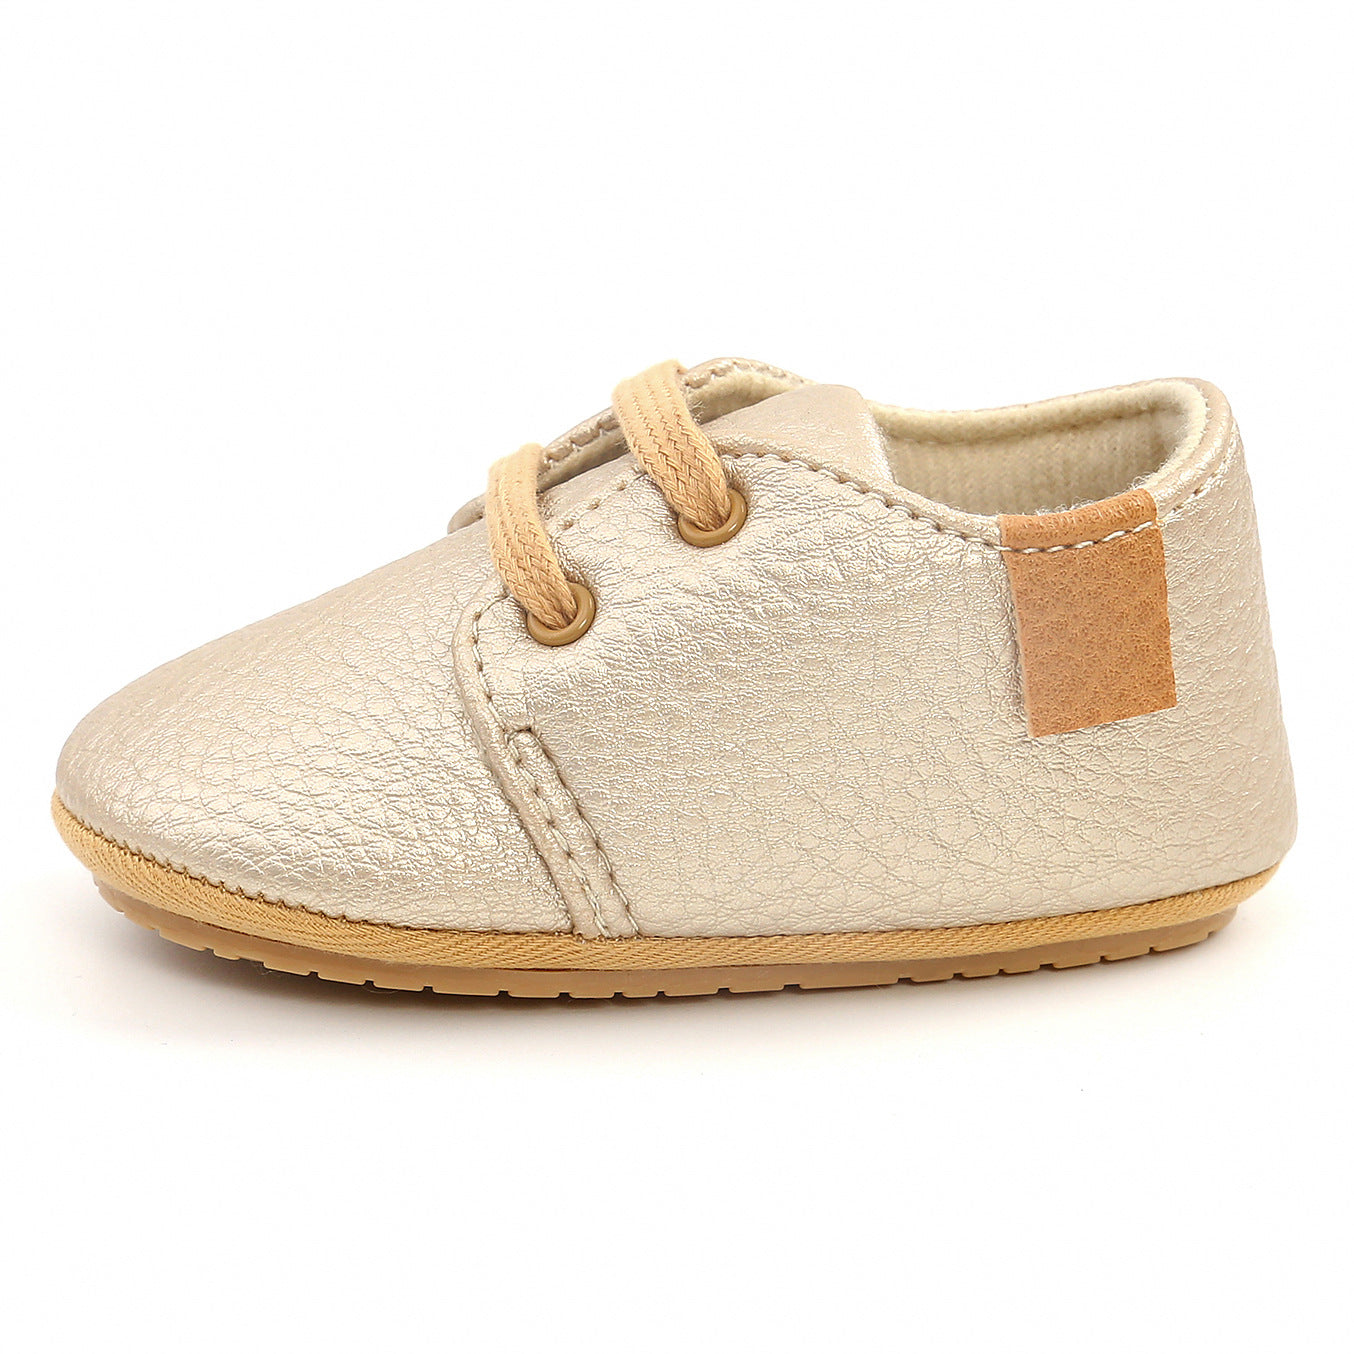 Luxury Soft Leather Rubber Sole Toddler Shoes | GlamzLife